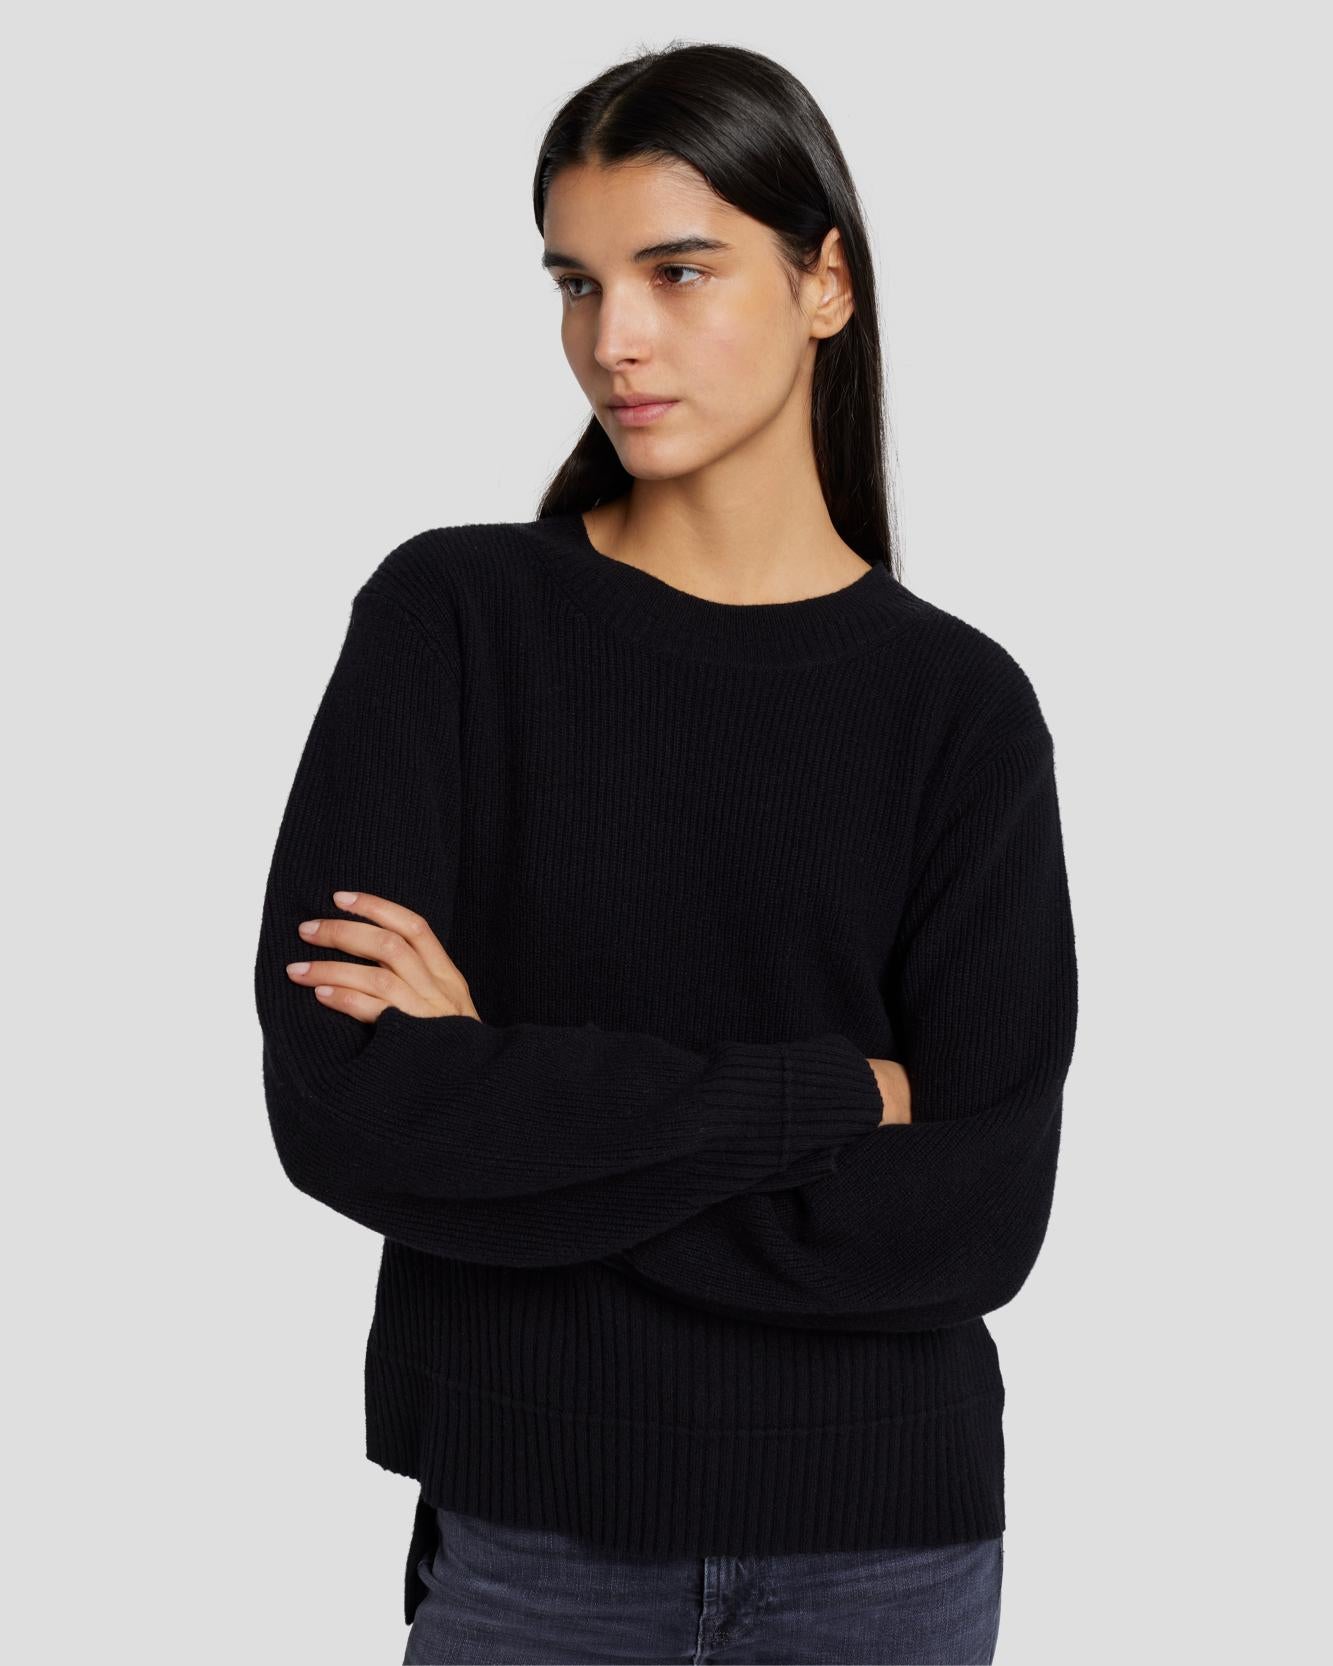 Cashmere Crewneck Sweater in Black | 7 For All Mankind